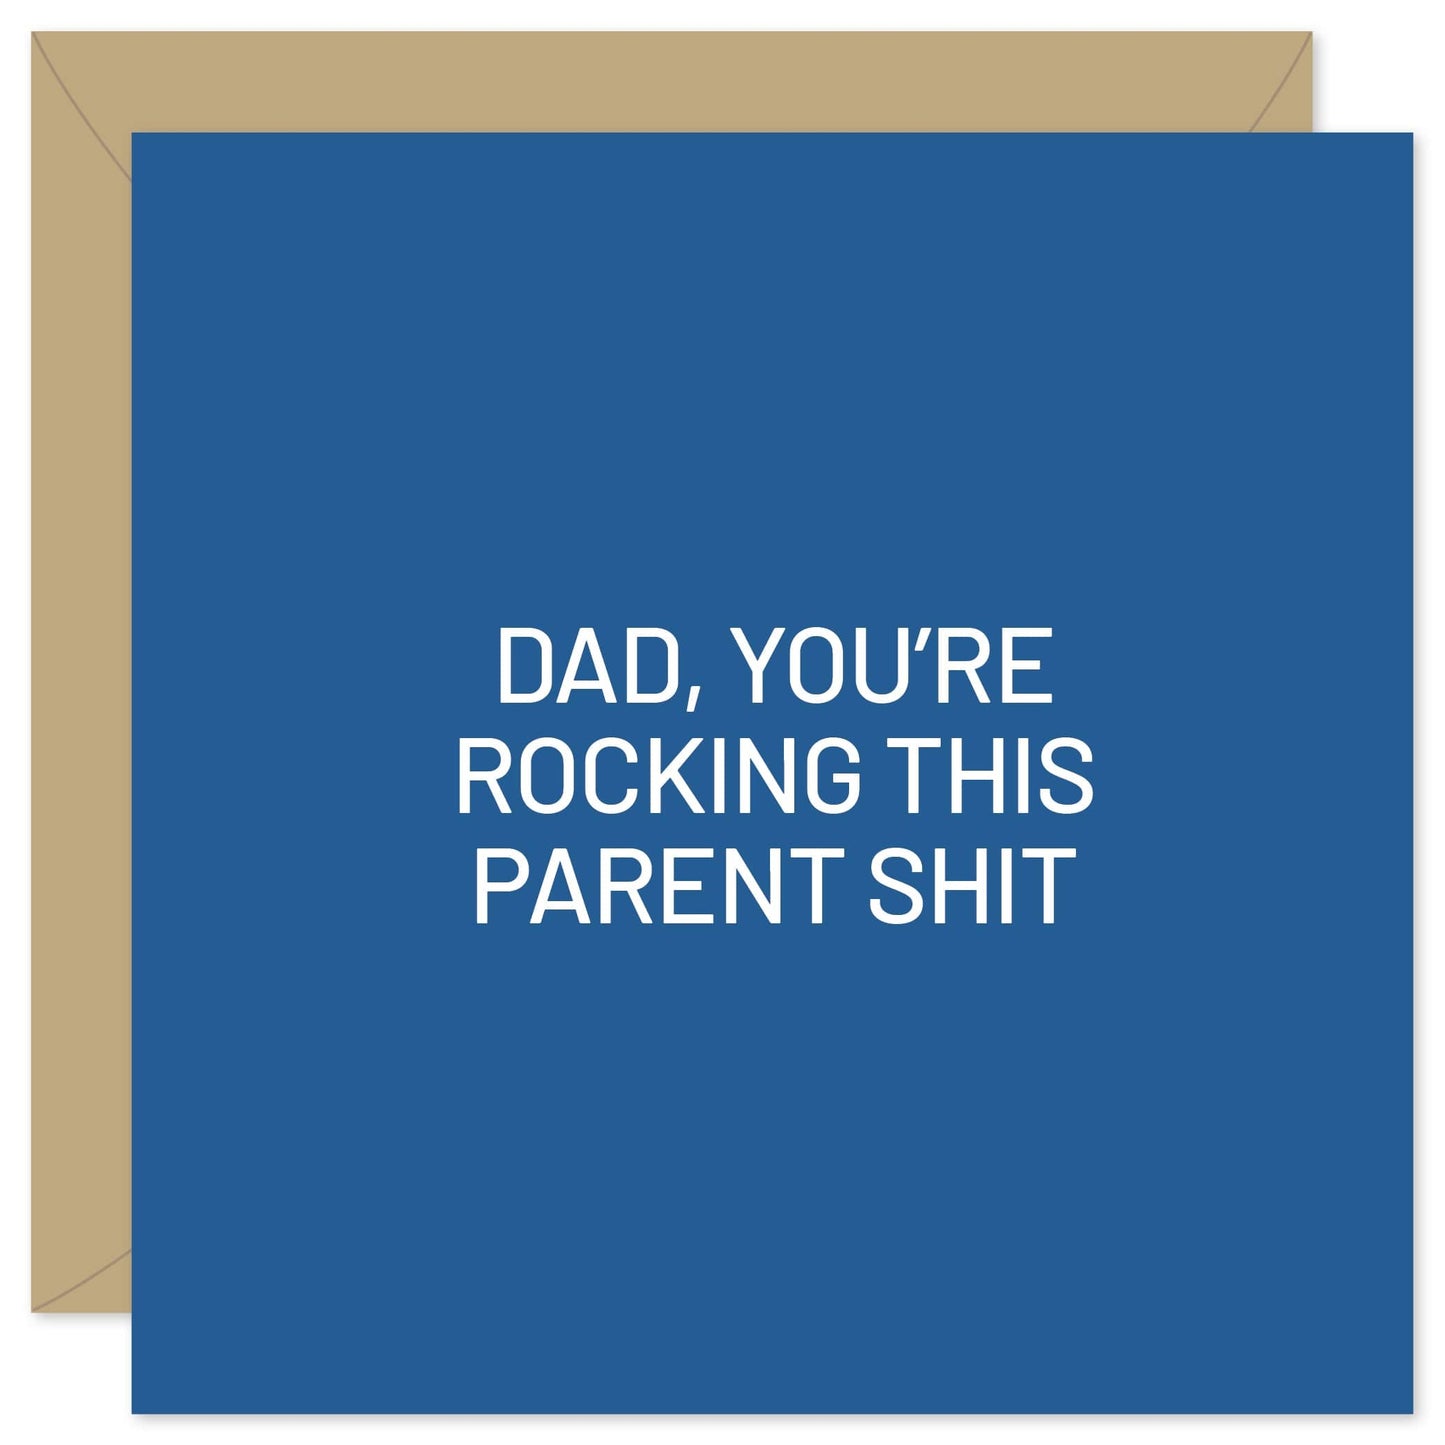 Rocking this parent shit dad card from Purple Tree Designs